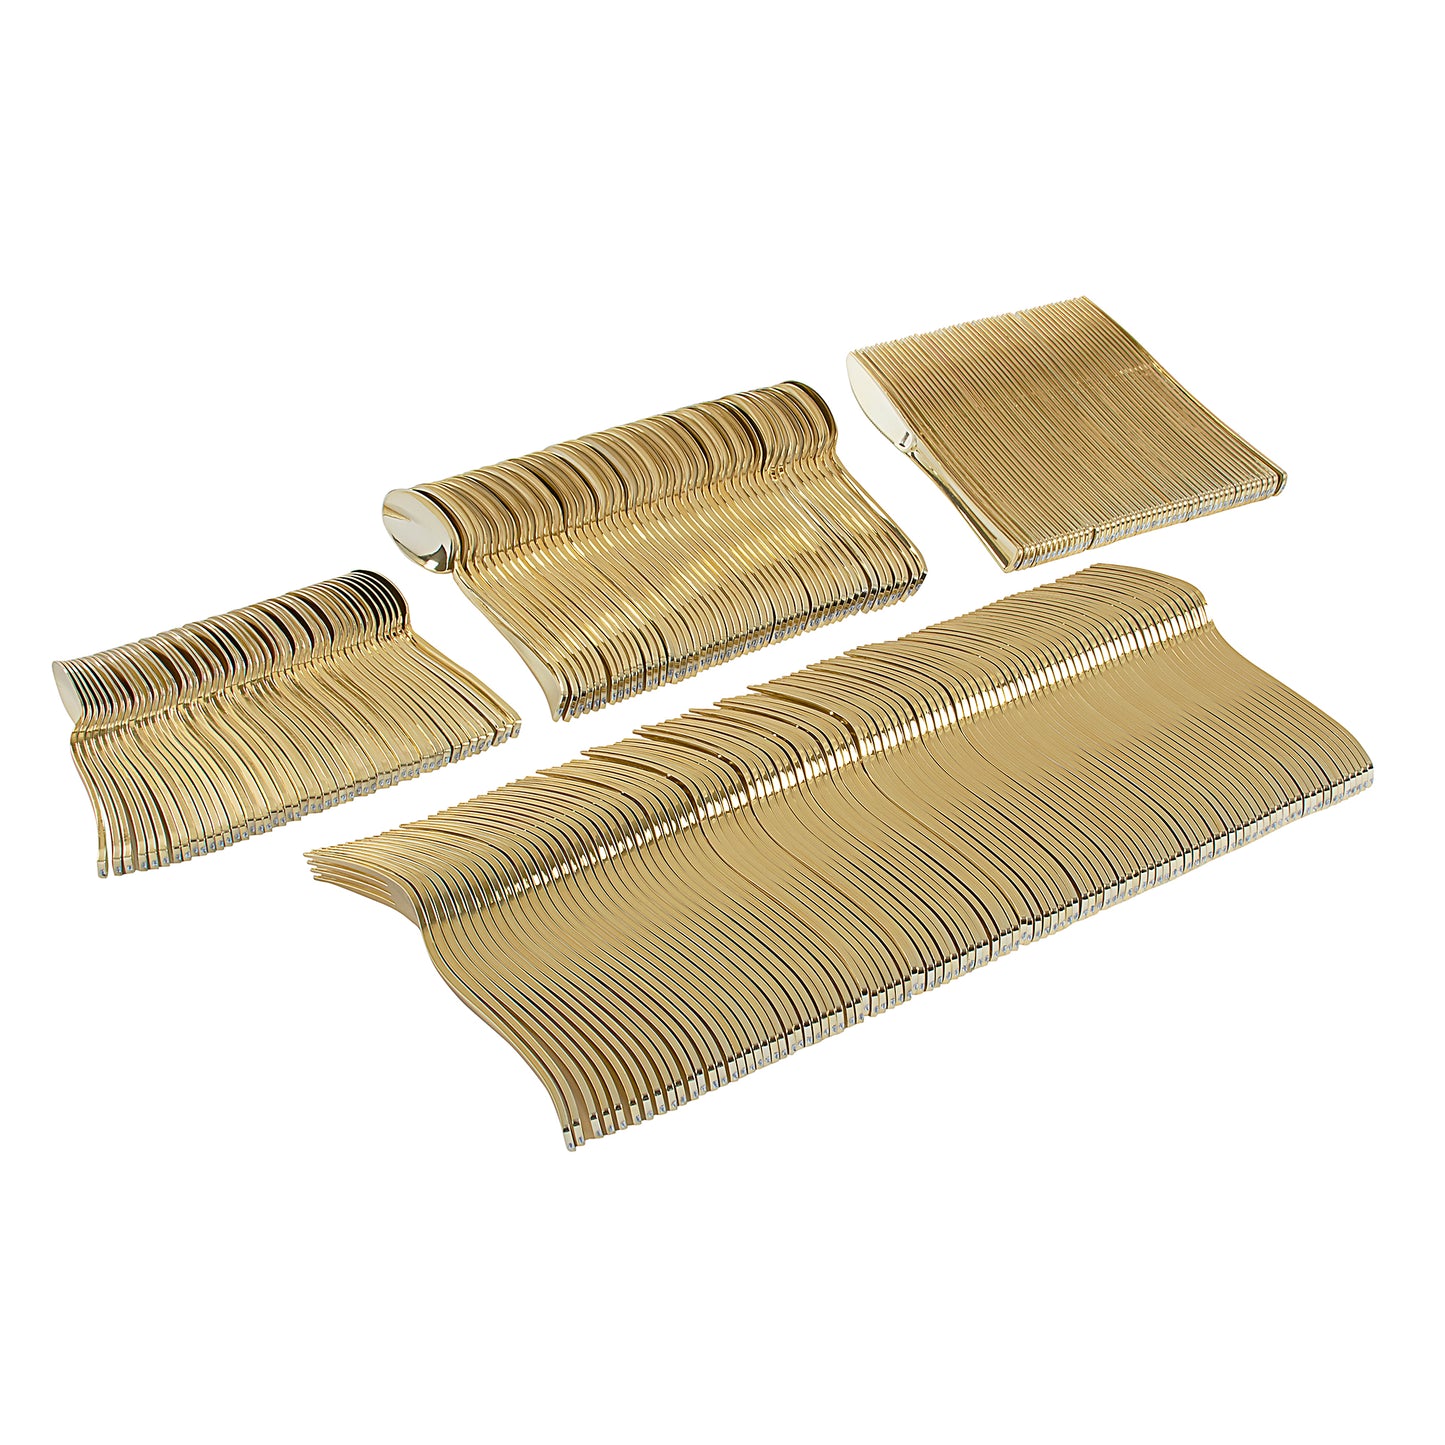 250 Piece Gold Plastic Silverware Set (for 50 guests): 100 forks, 50 knives, 50 spoons, 50 mini spoons